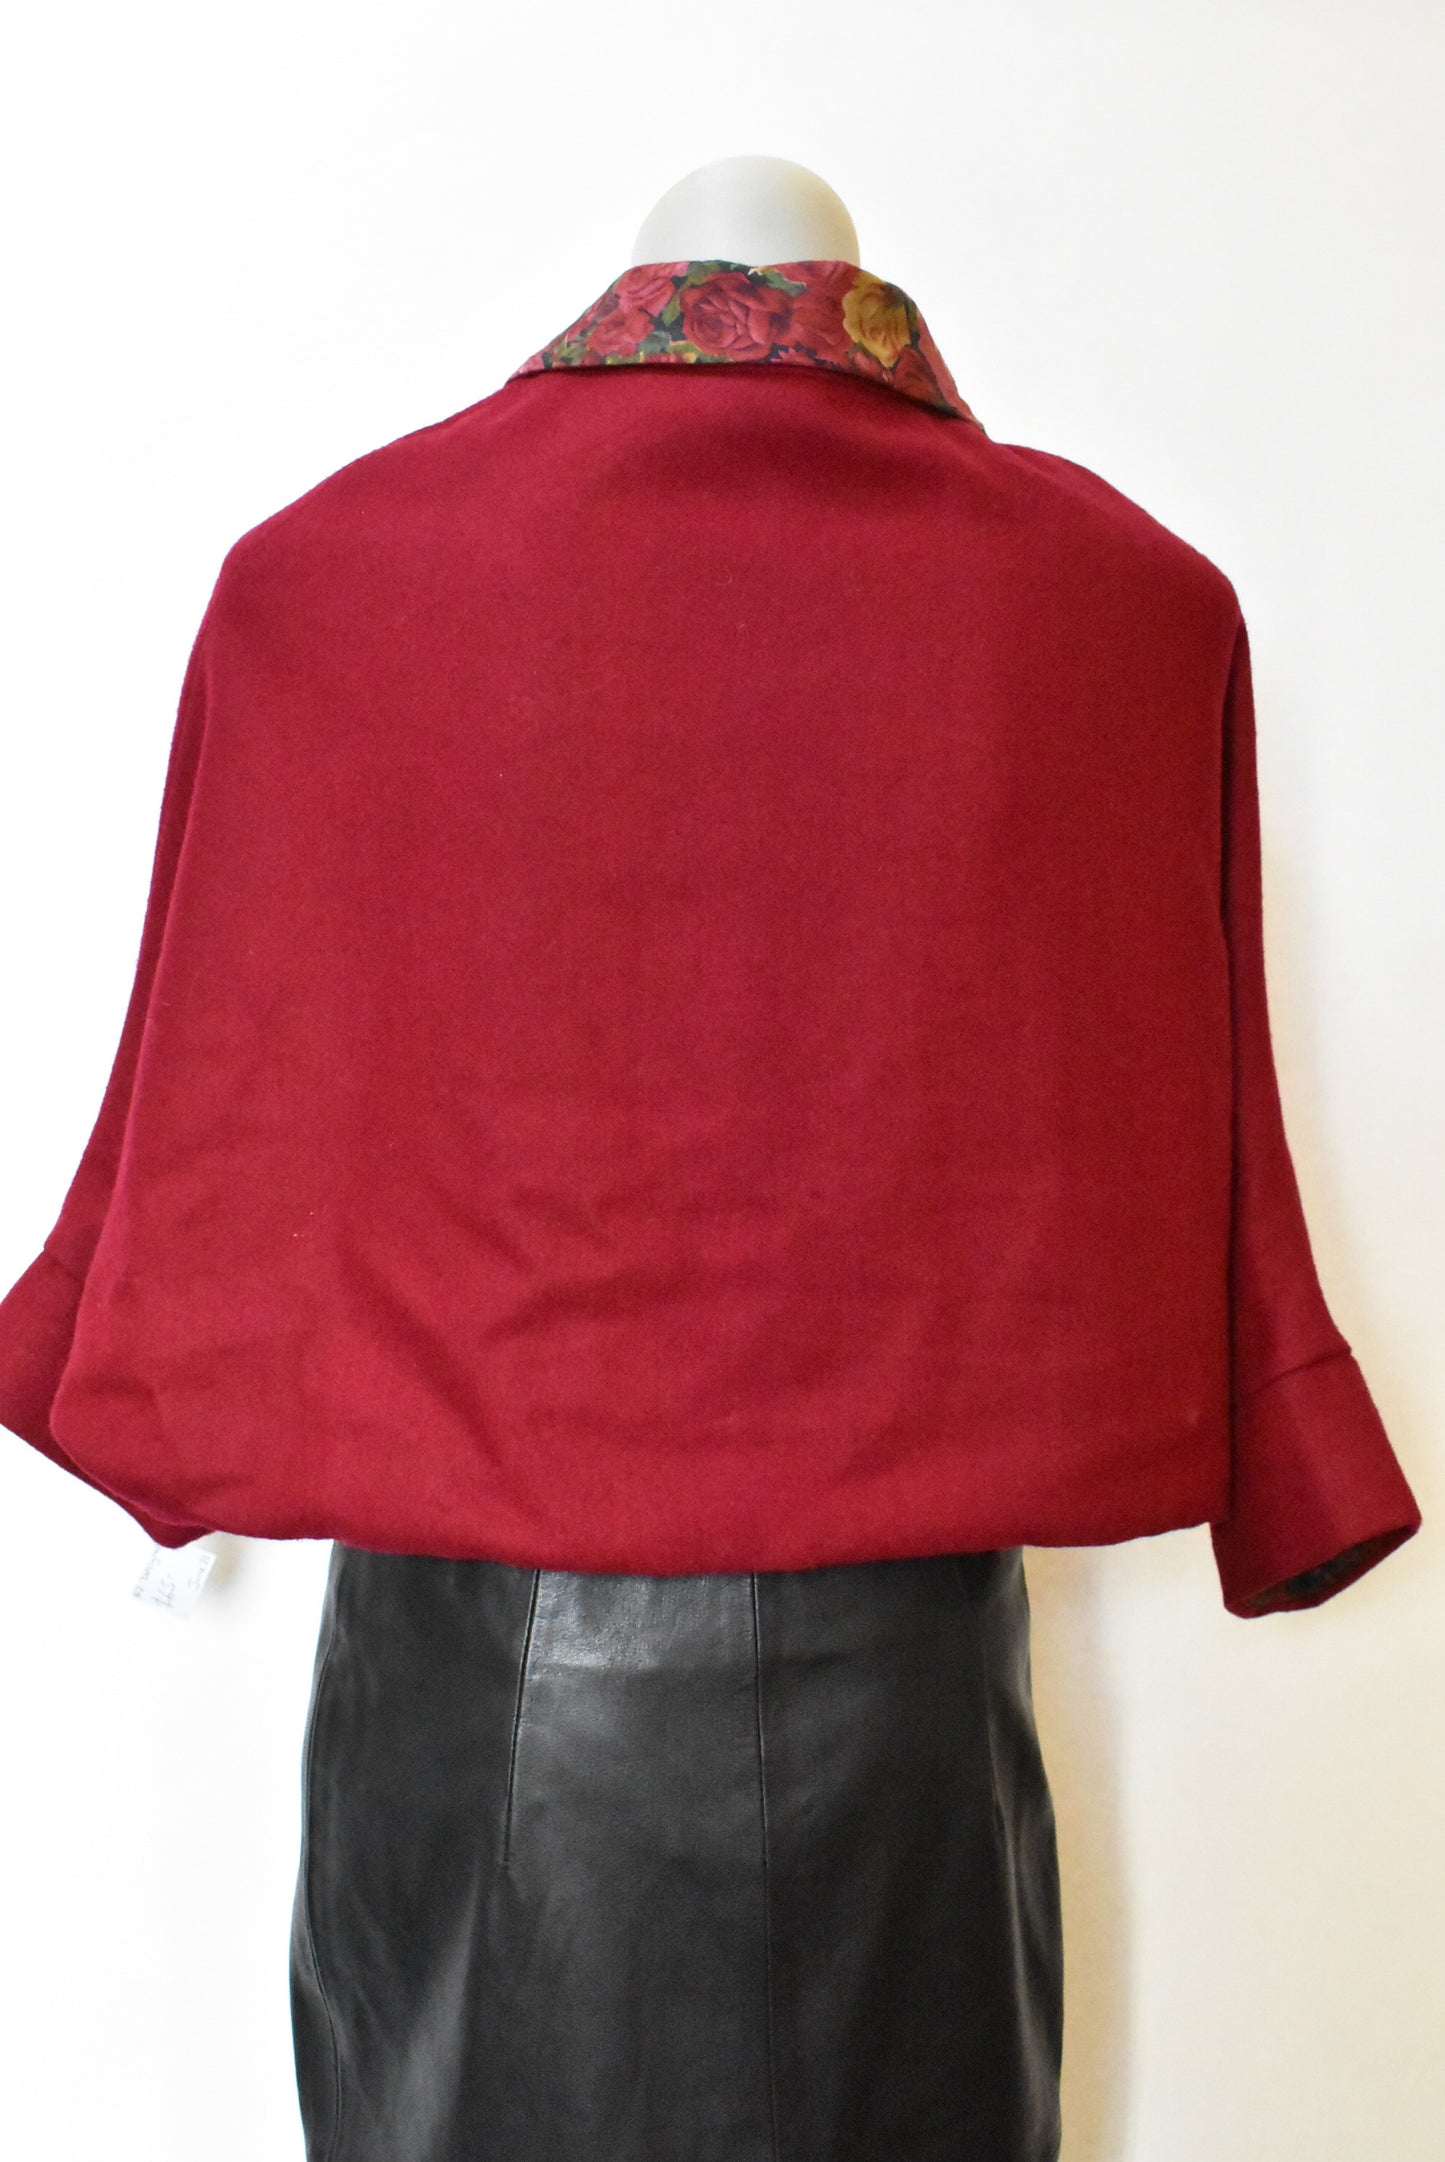 Chelsea Gale, ruby red and floral poncho, OSFM